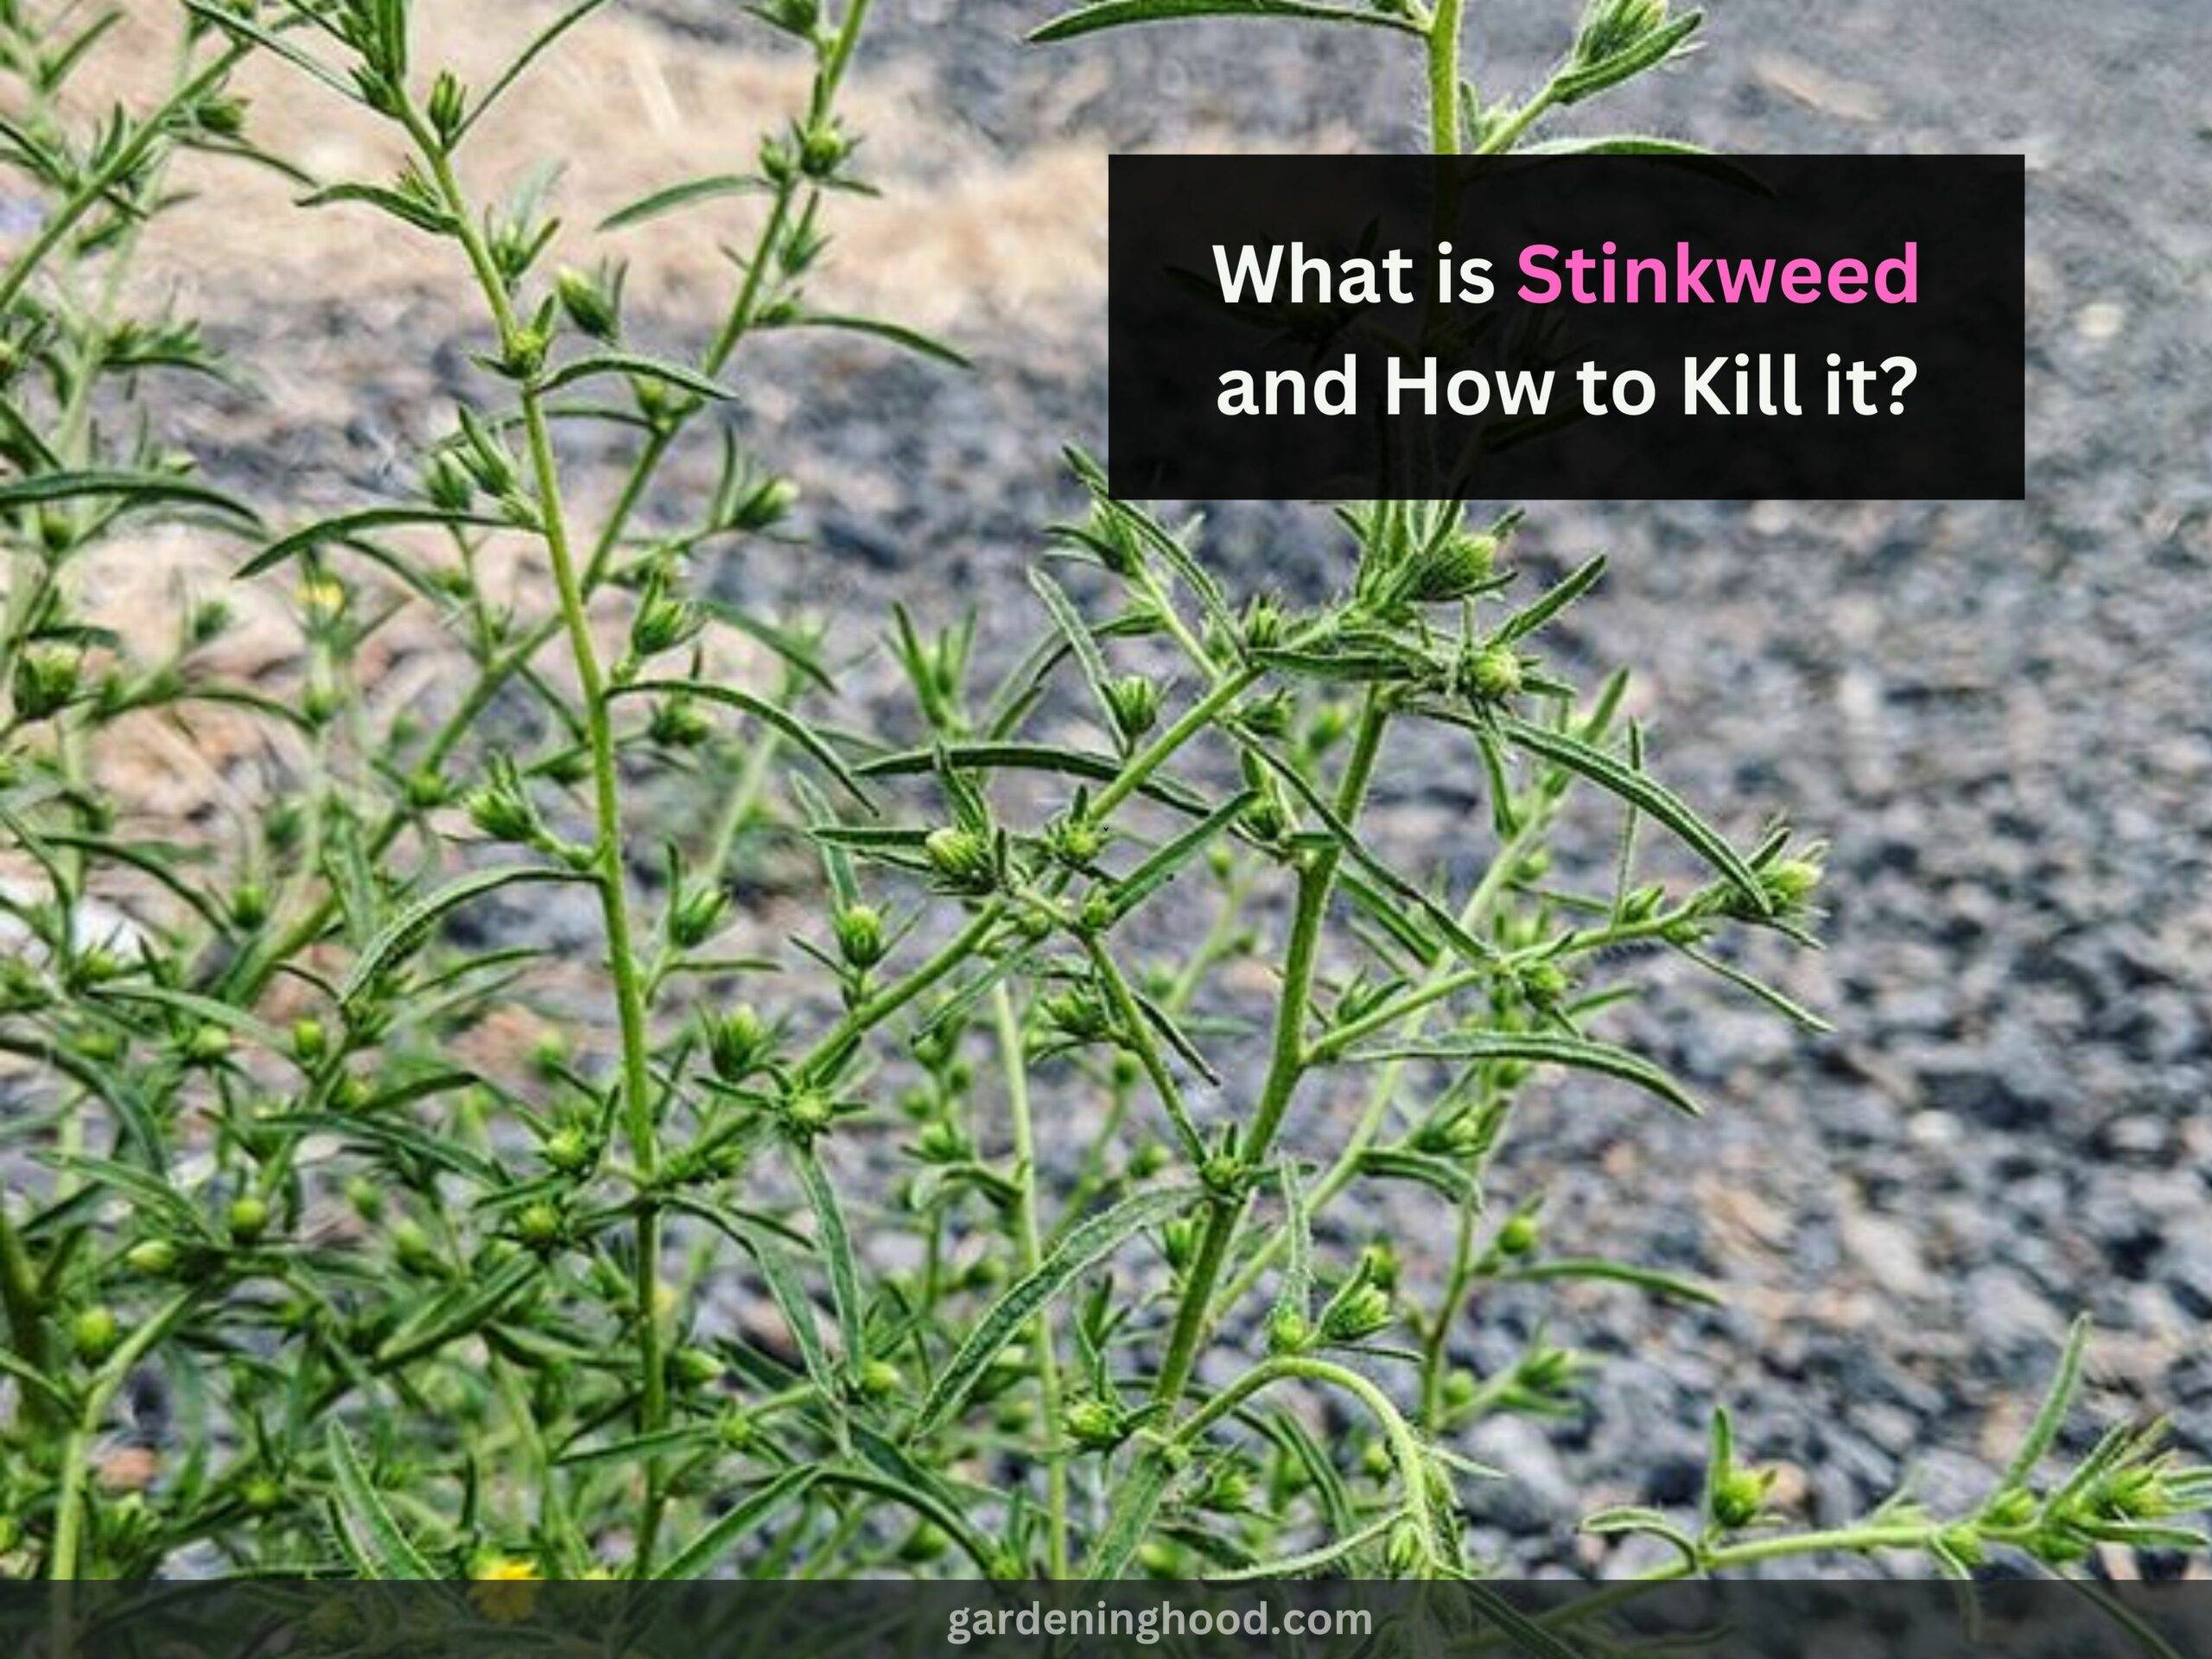 What is Stinkweed and How to Kill it?